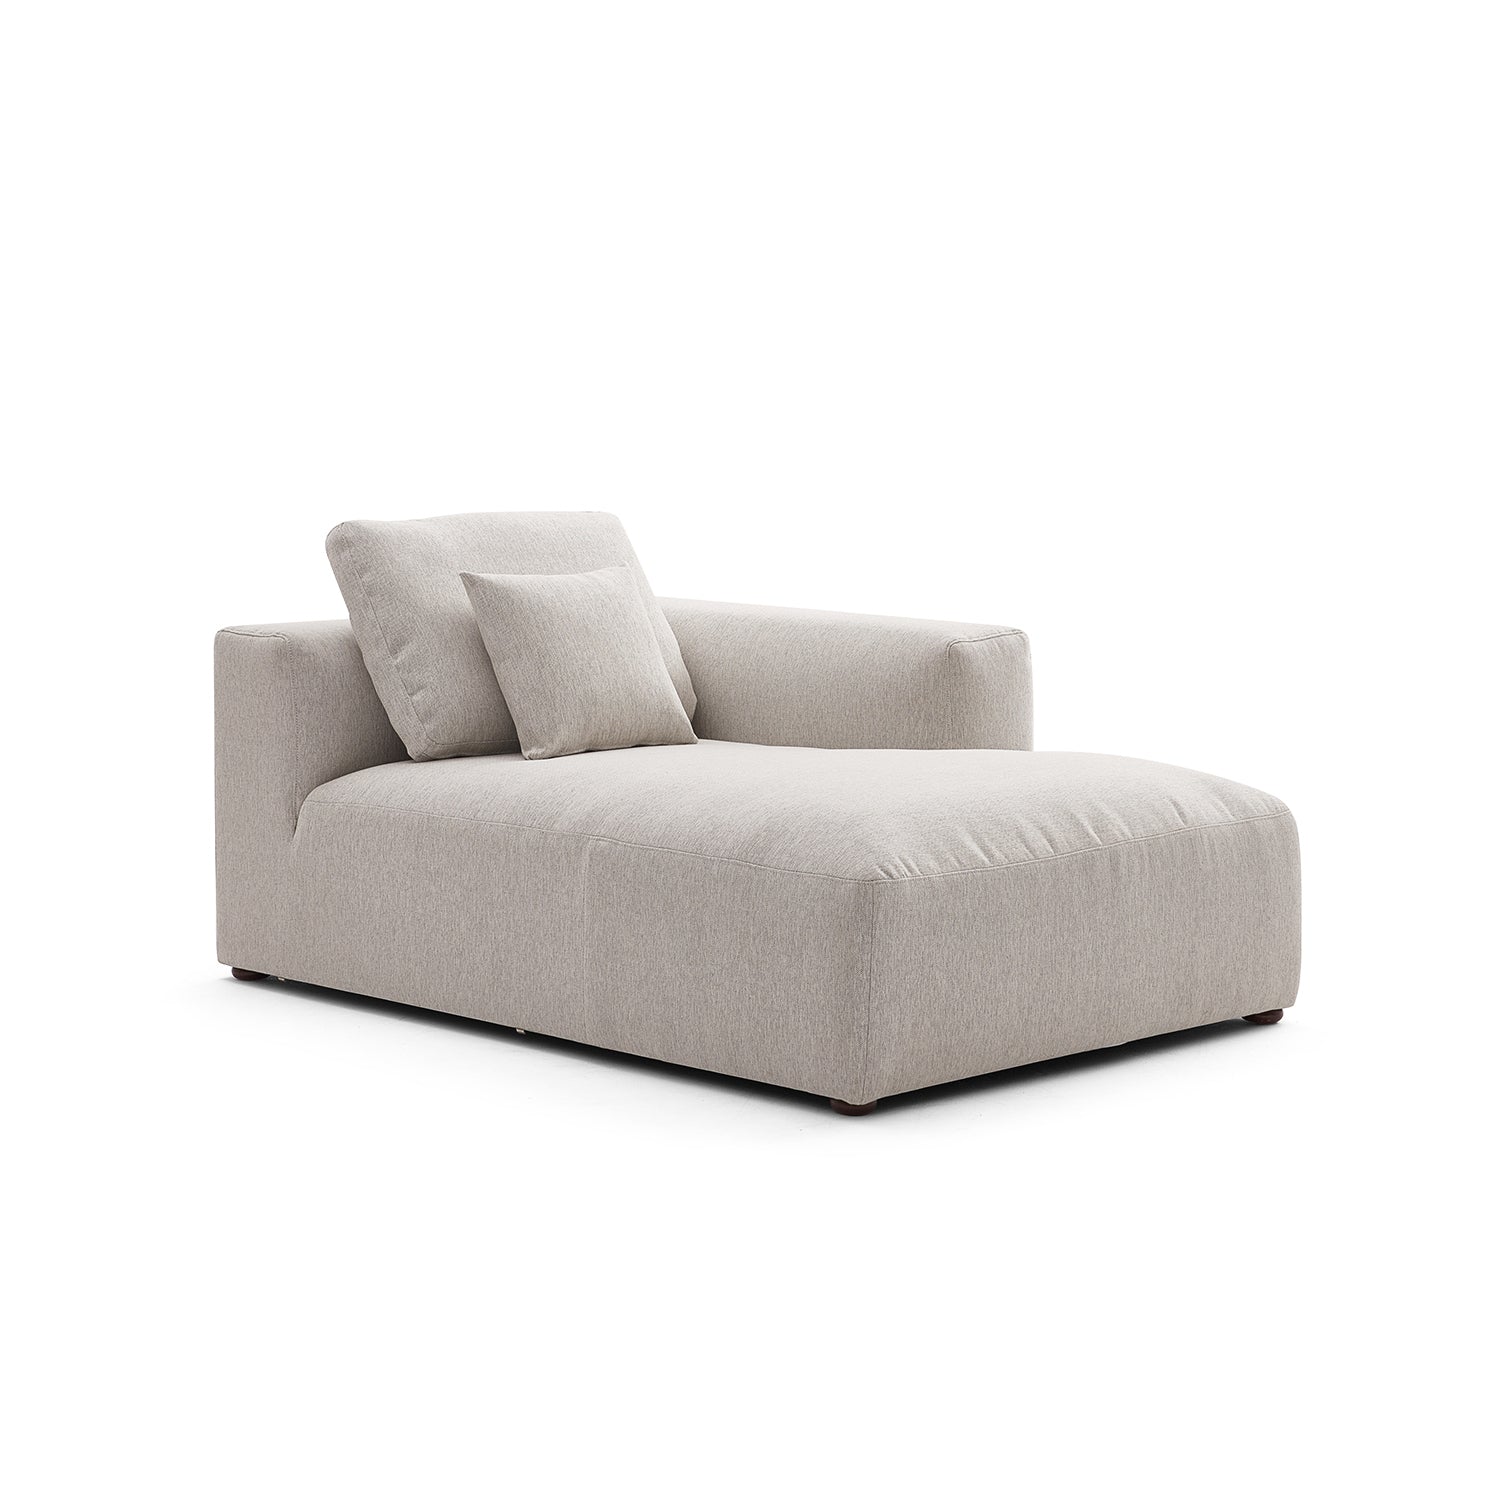 The 5th Chaise, Modular Sofa, Foundry | Valyou Furniture 